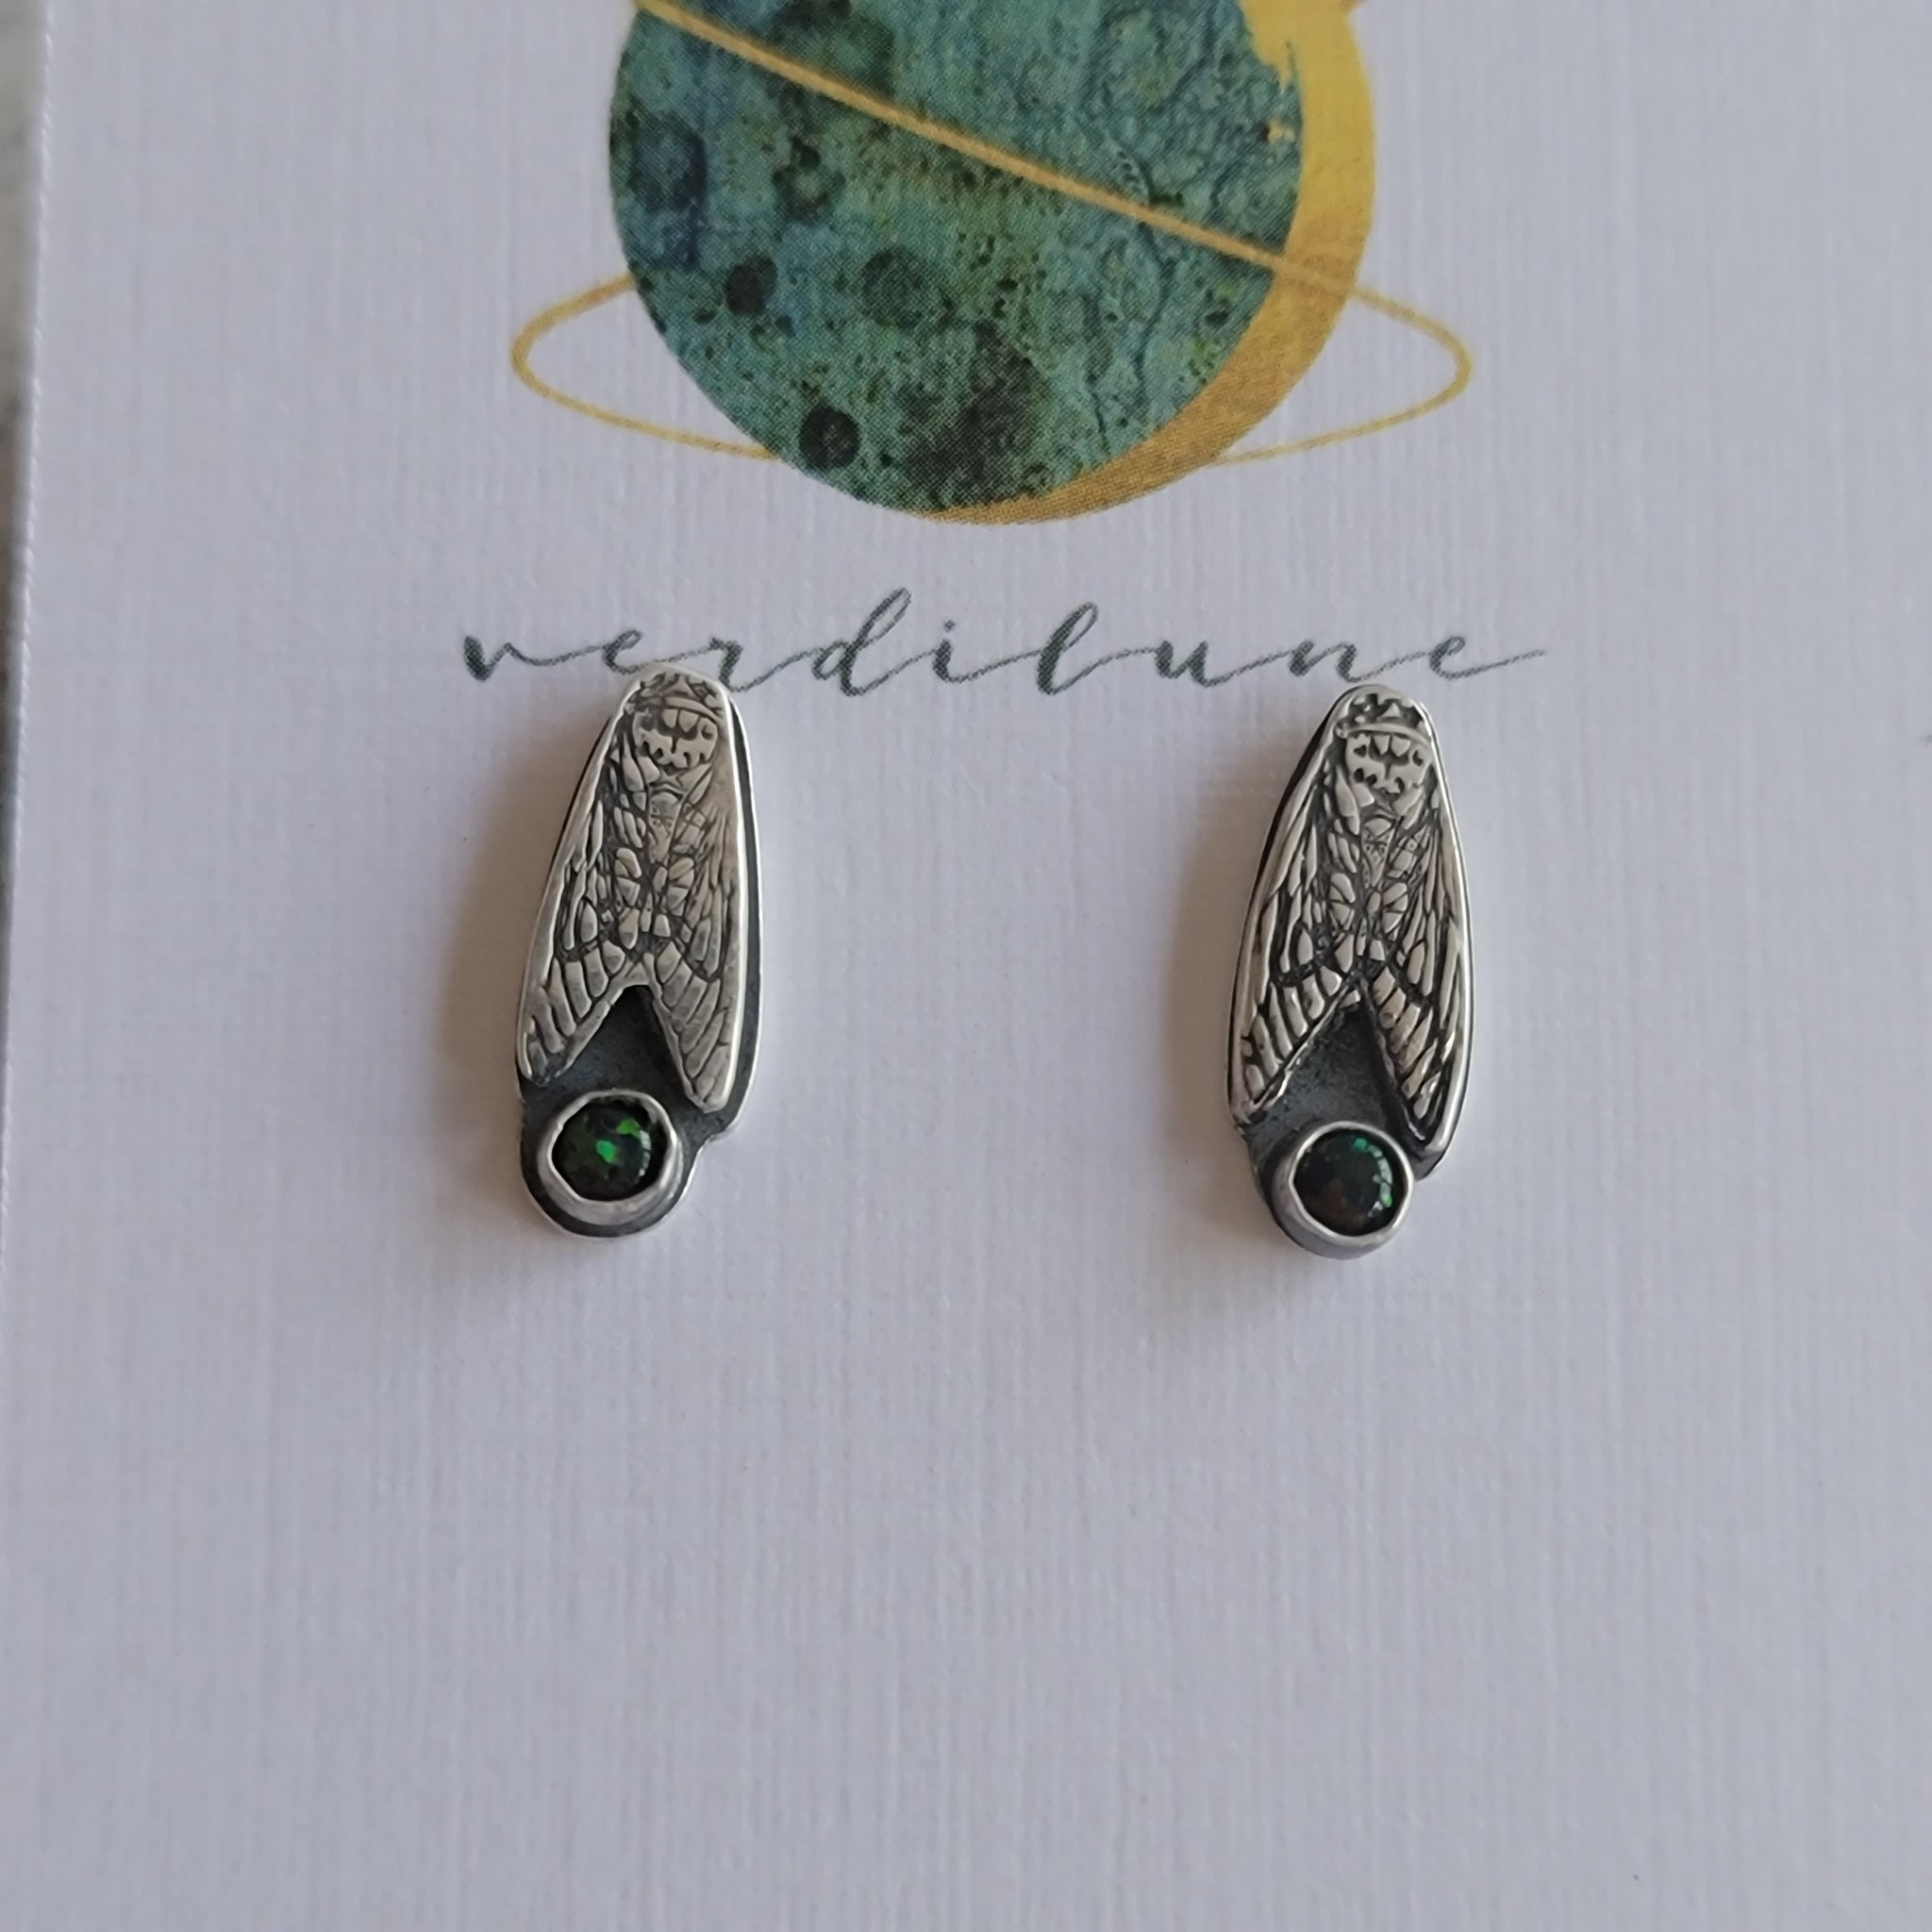 Sterling Silver Cicada Stud Earrings with Black Opal